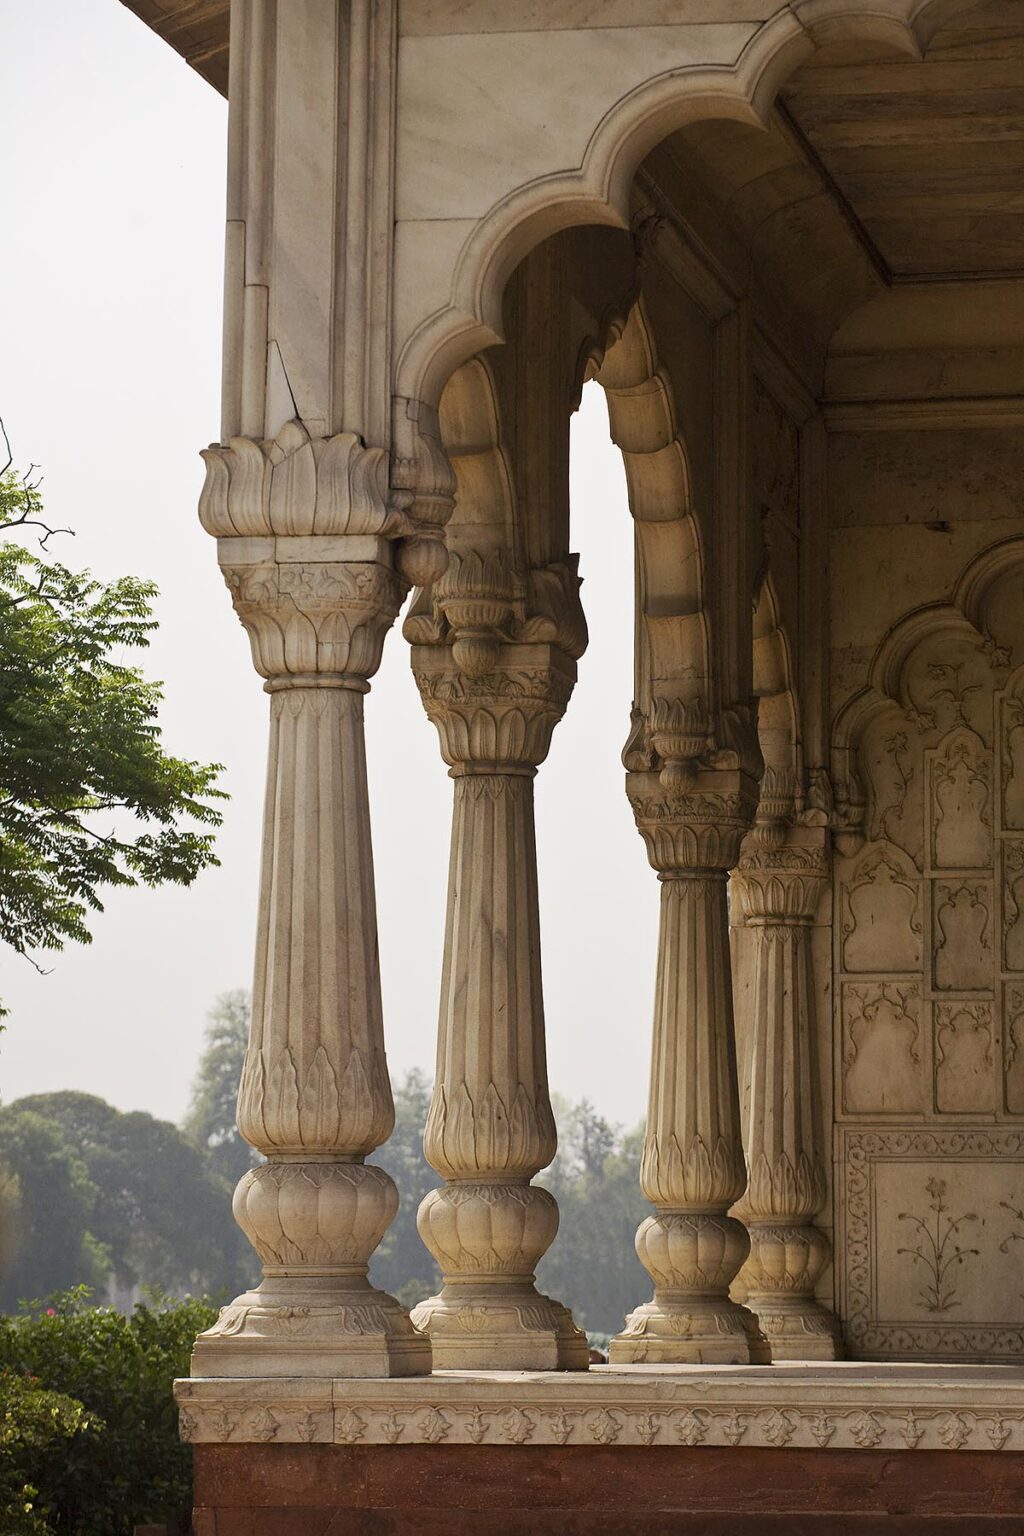 MARBLE PILLAR and archway inside the RED FORT or LAL QILA which was built by Emperor Shah Jahan in 1628 - OLD DELHI, INDIA